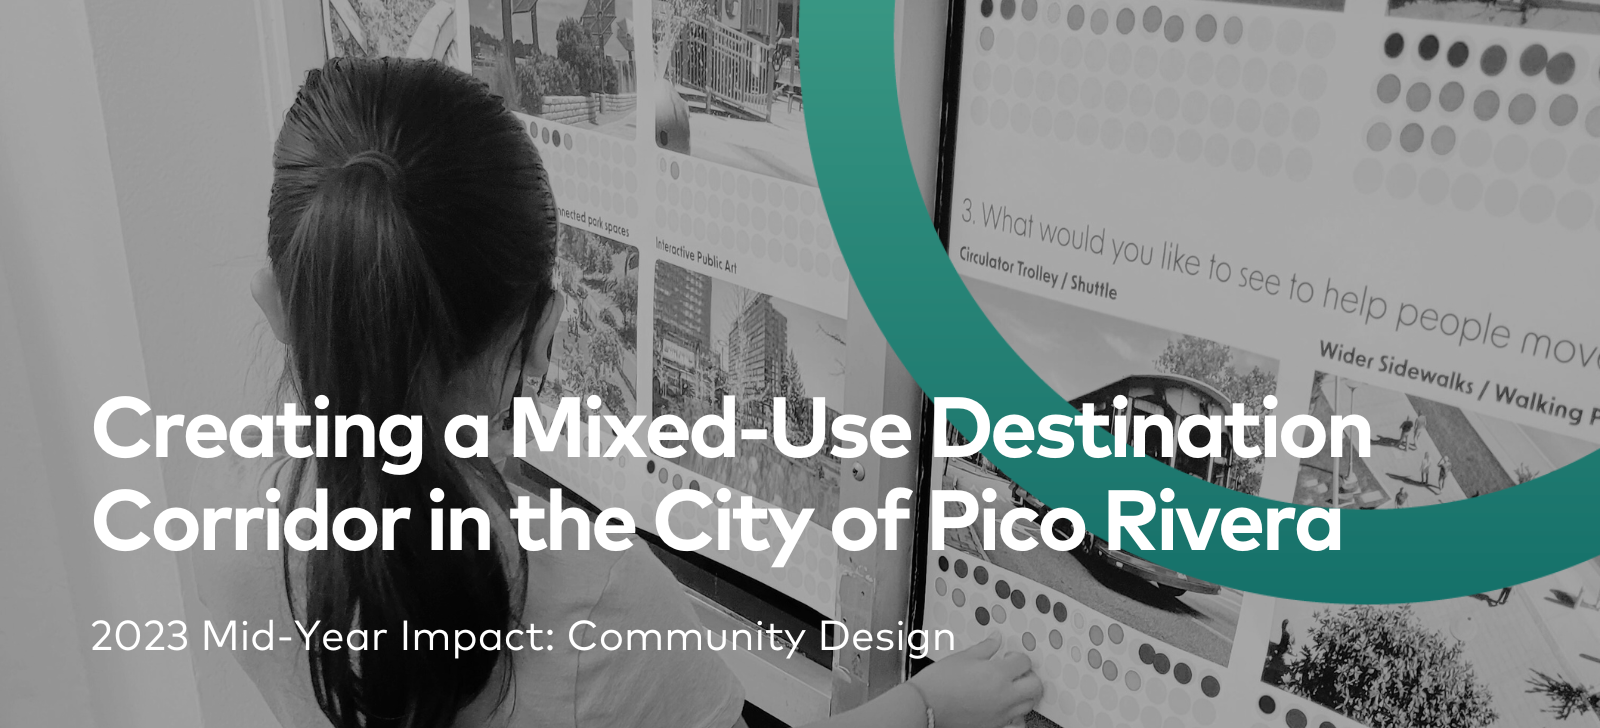 Creating a Mixed-Use Destination Corridor in the City of Pico Rivera: Community Design 2023 Mid-year Impact